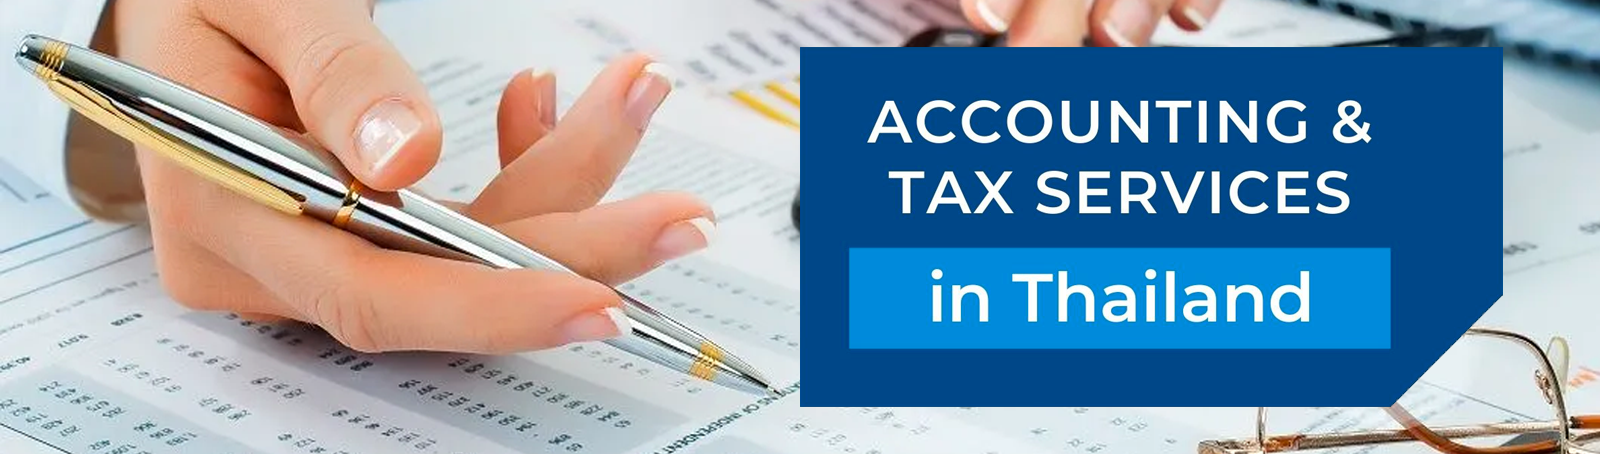 Accounting & Tax Services in Thailand